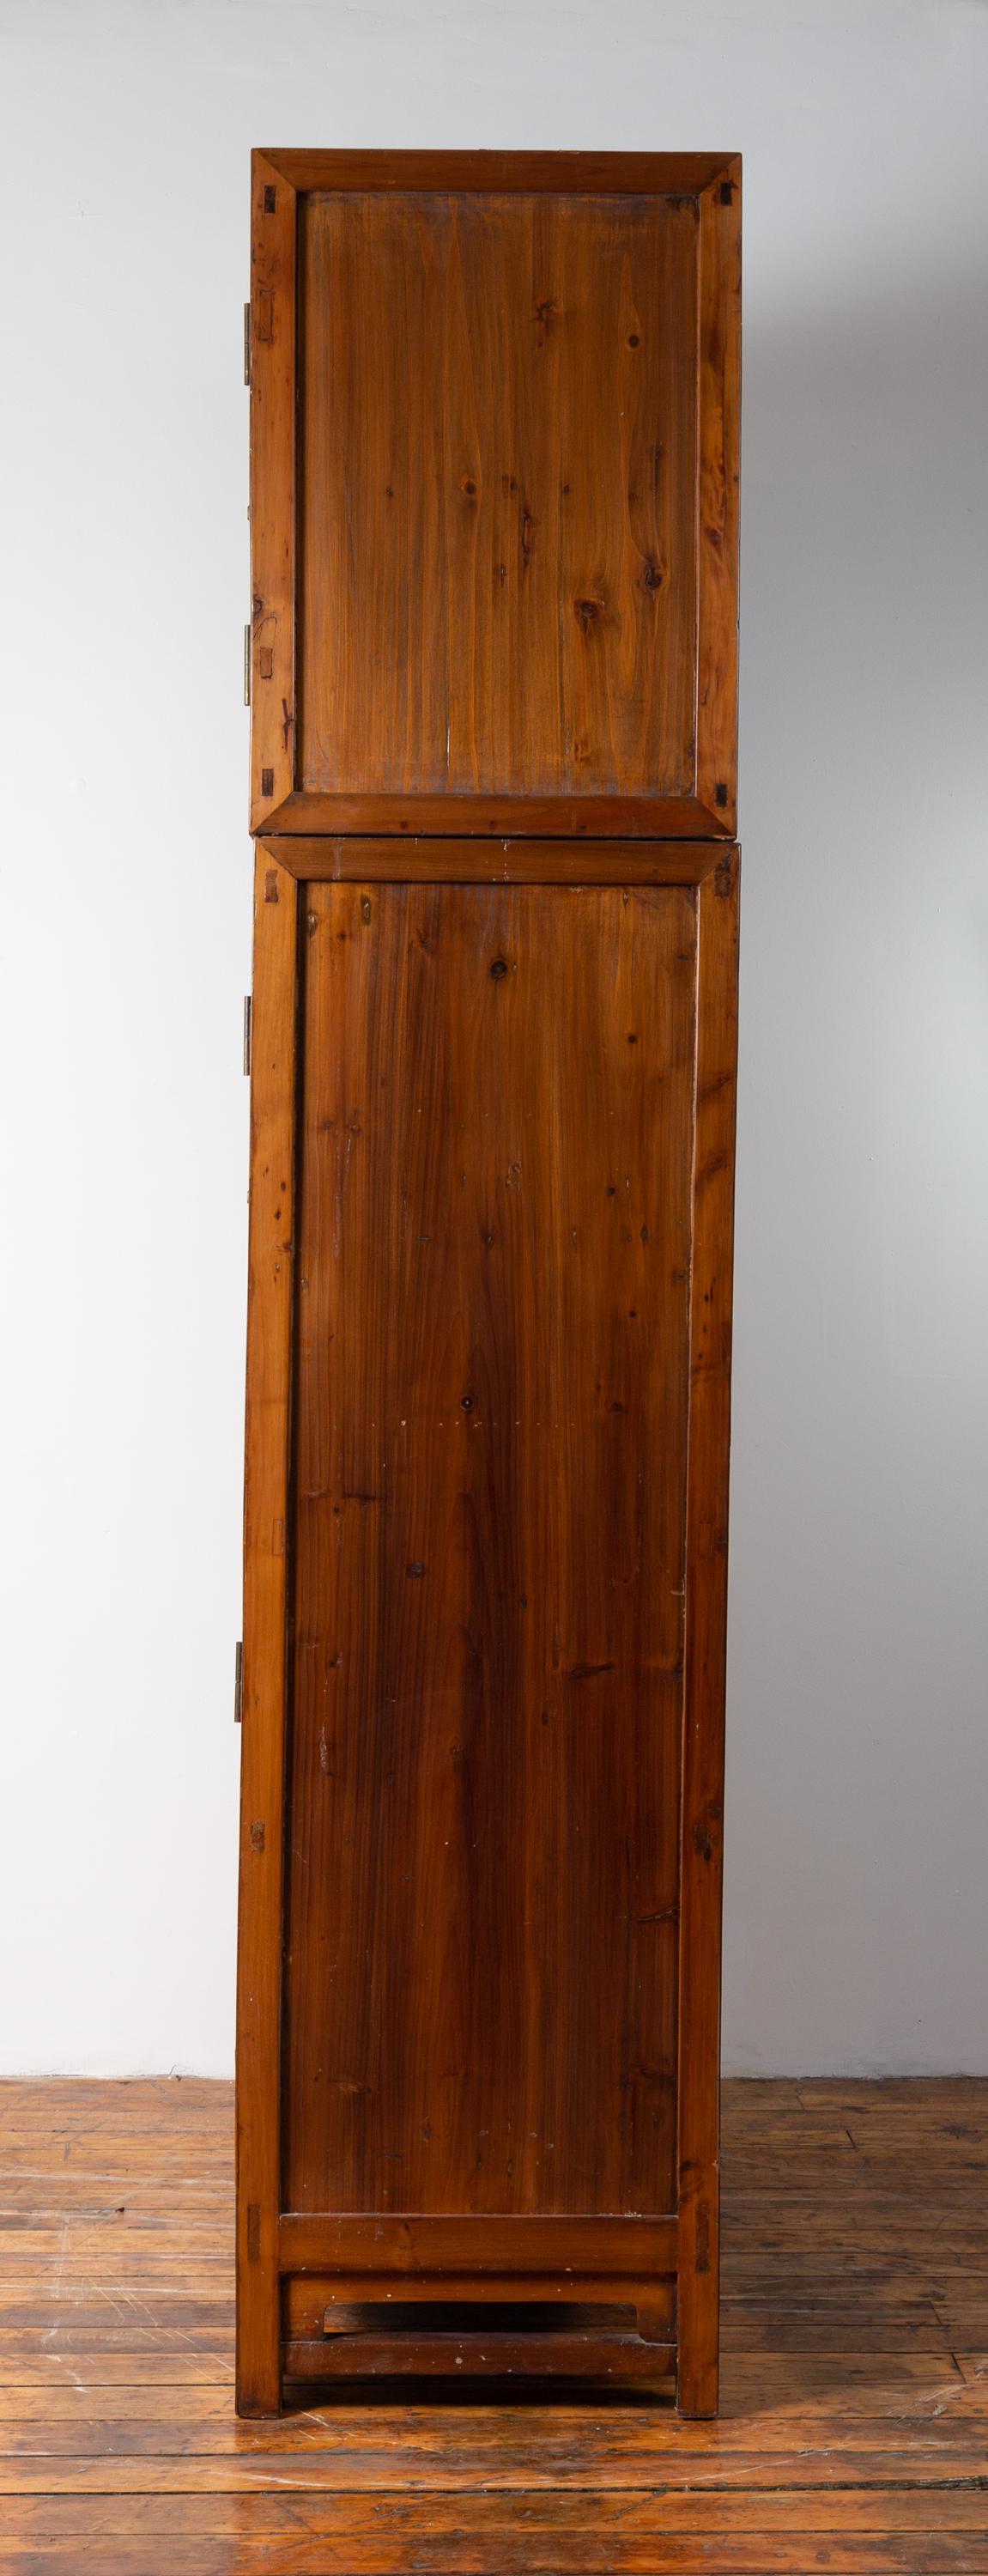 Vintage Elm Wood Compound Two-Part Wedding Wardrobe with Doors and Drawers For Sale 1